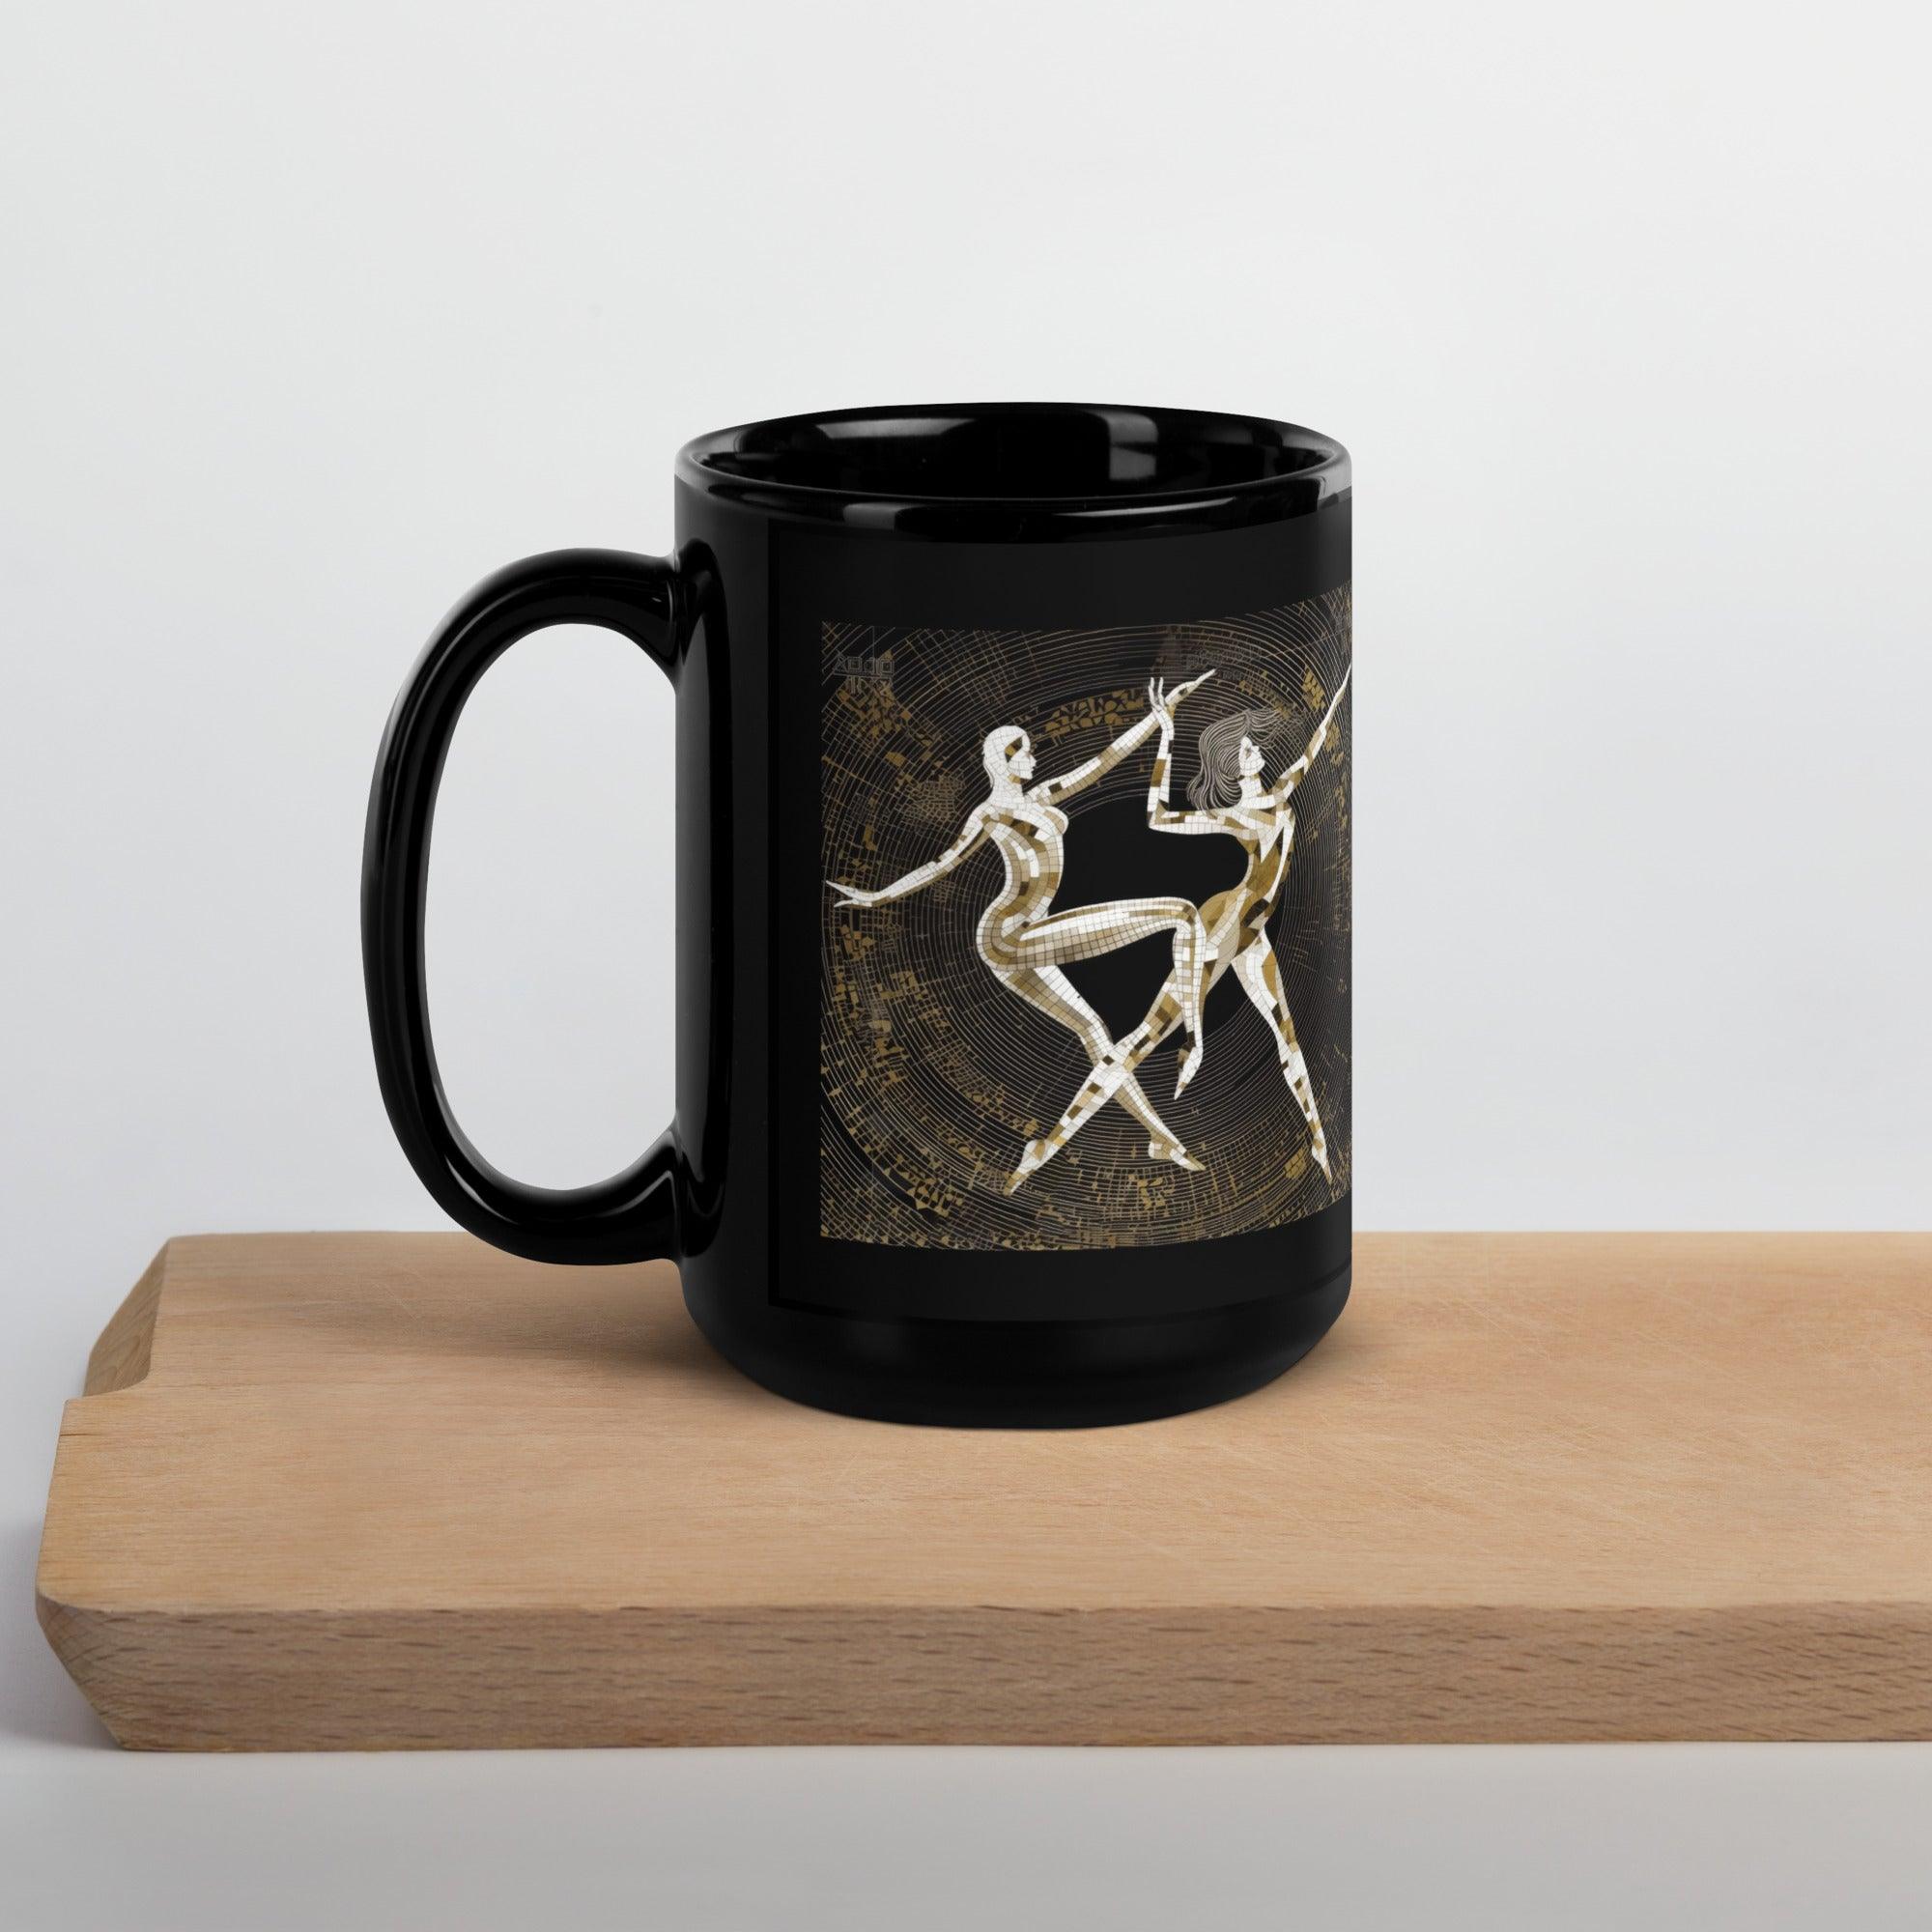 Stylish black tea mug with balletic patterns, ideal for home or office